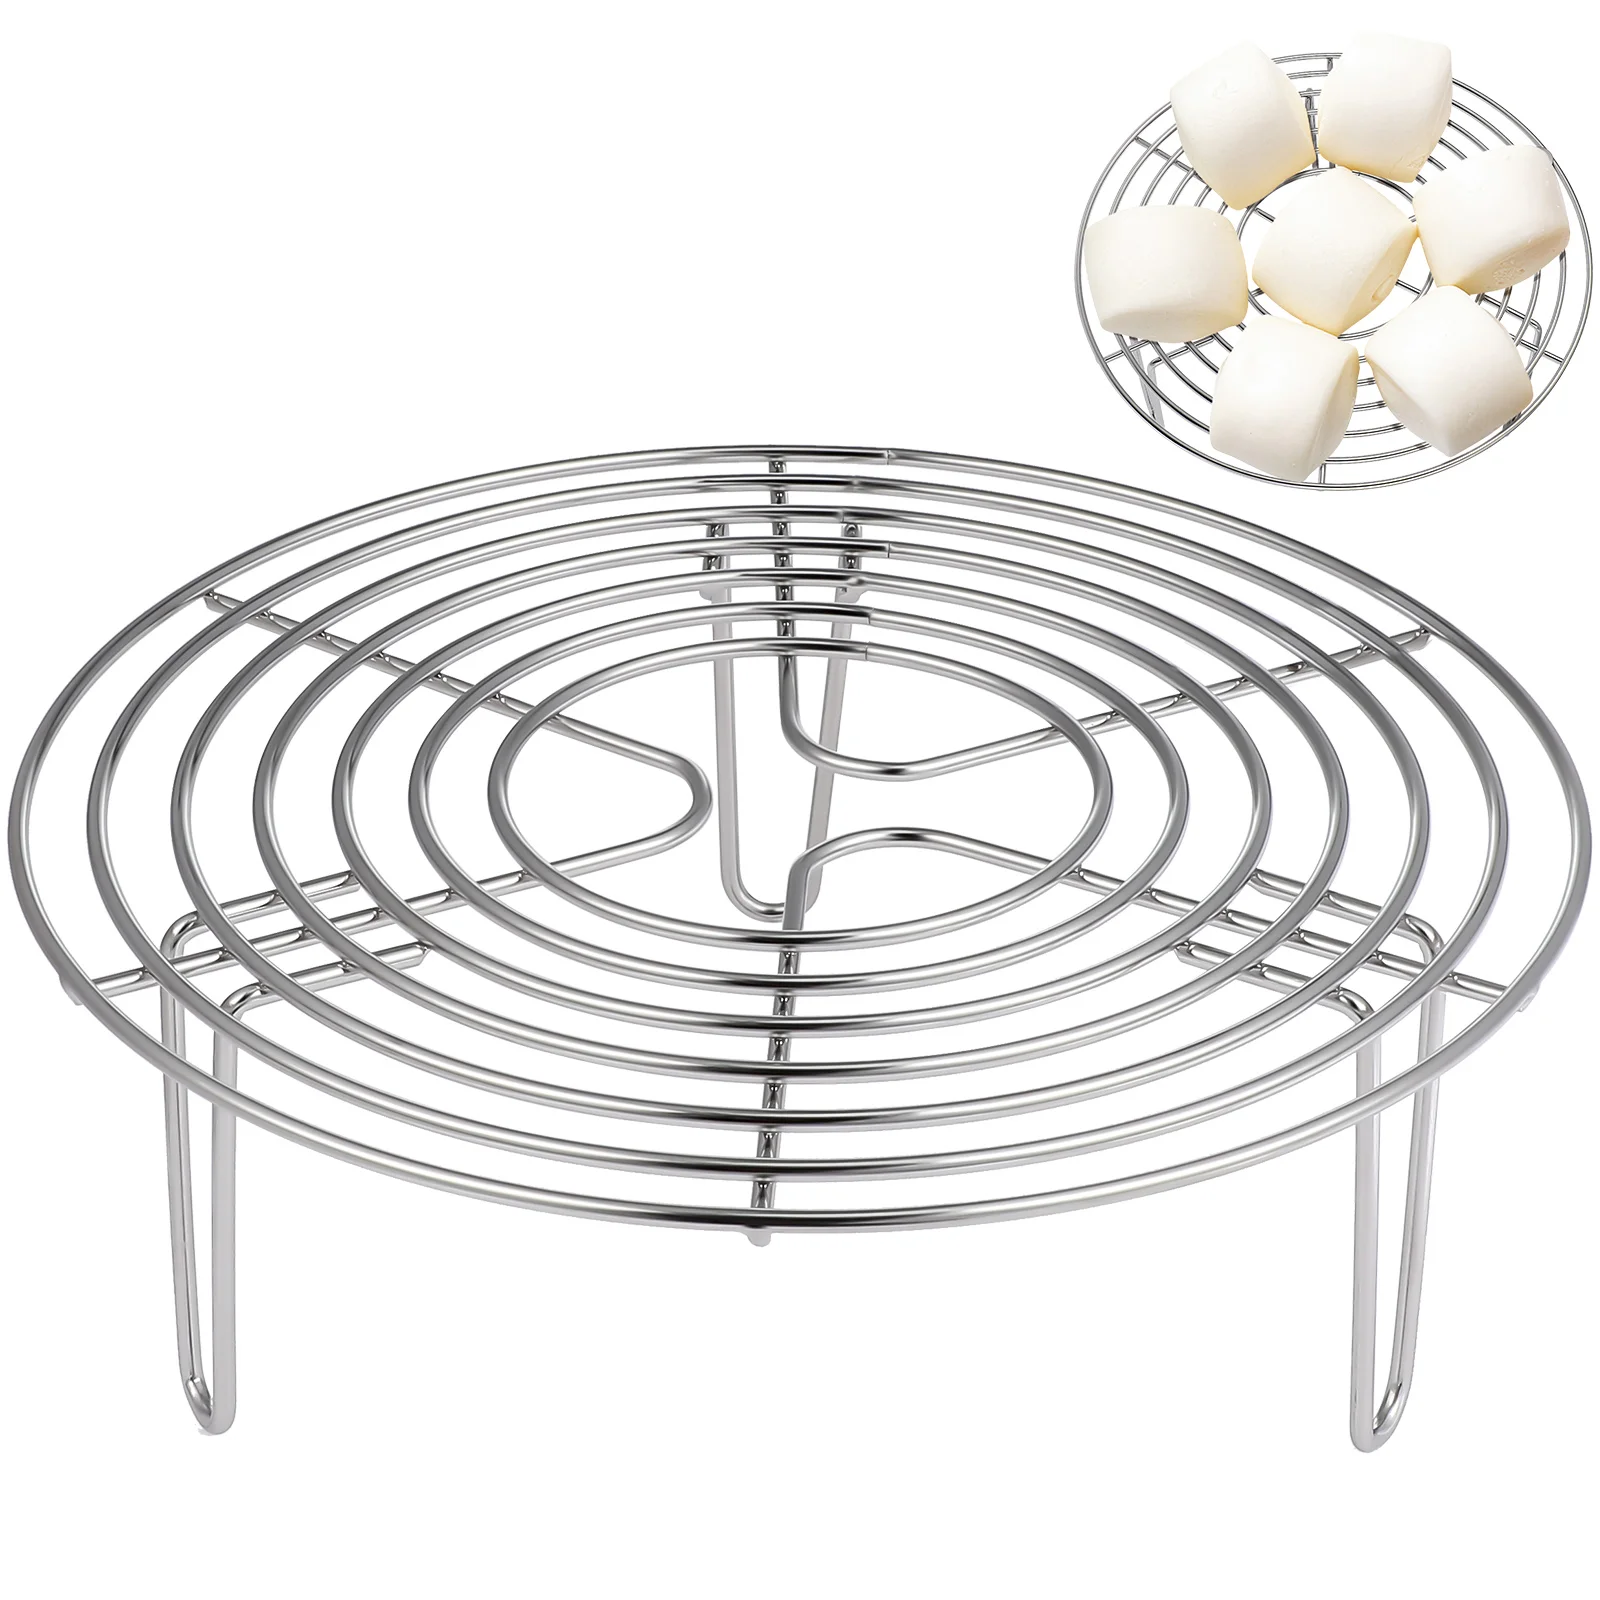 

Egg Steamer Stainless Steel Cooling Rack Round Wire Baking Tool Kitchen Stand Home Tools Air fryer grid